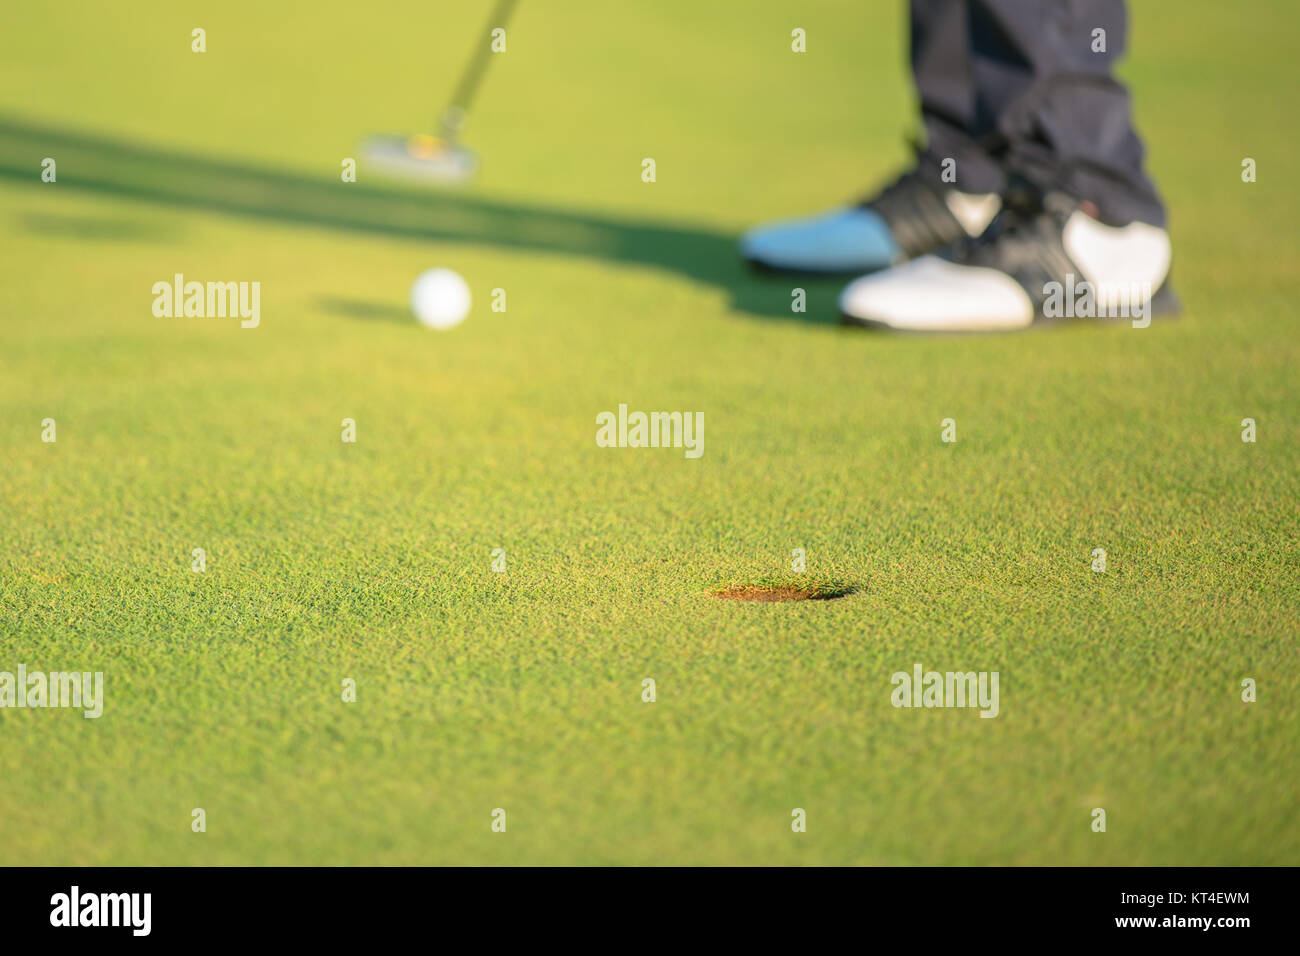 Man Playing Golf Banque D'Images